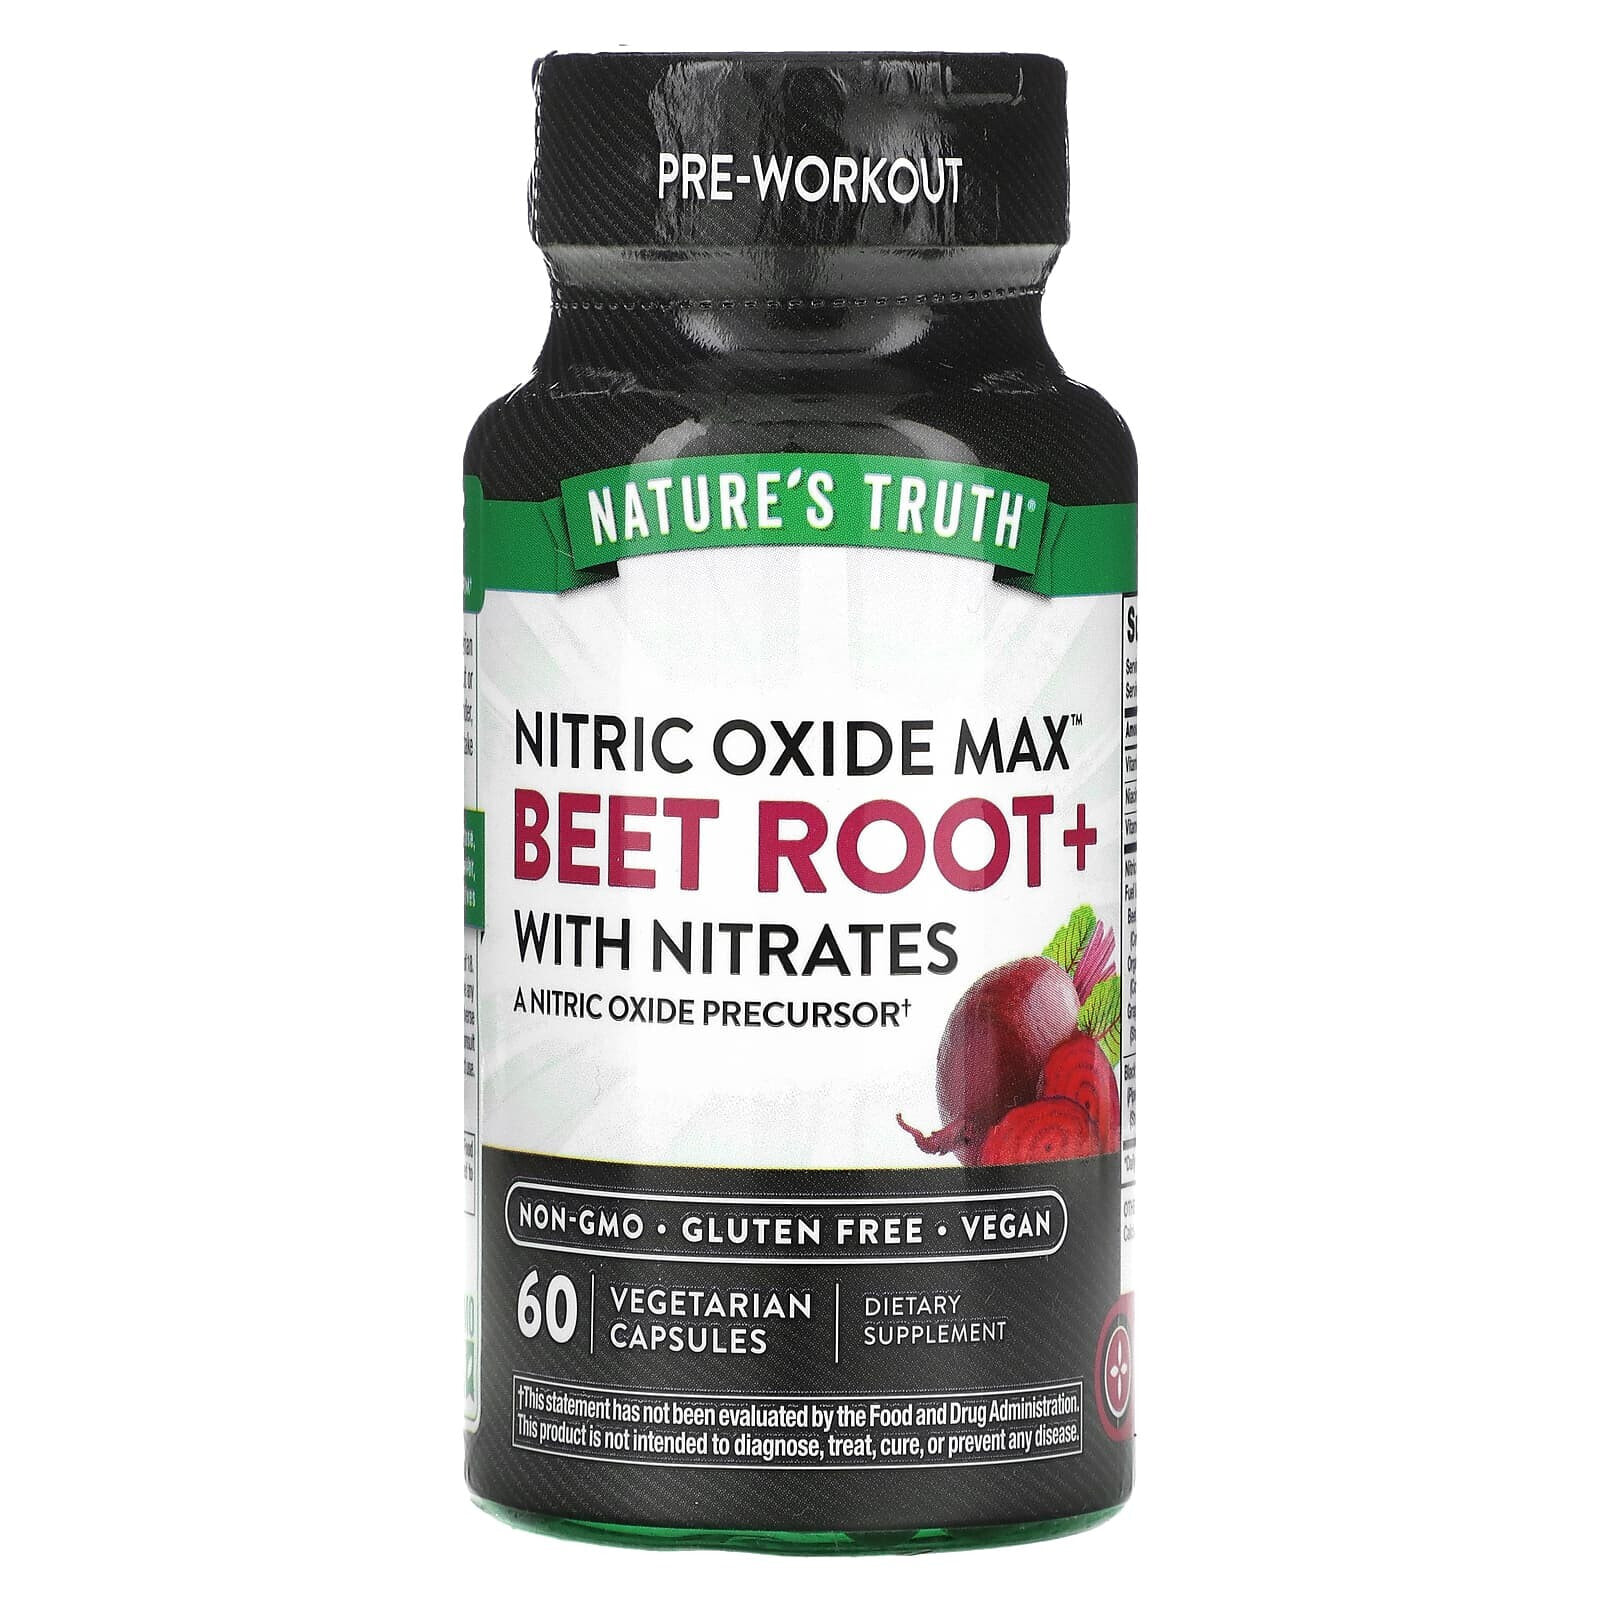 Nitric Oxide, Beet Root+ with Nitrates, 60 Vegetarian Capsules